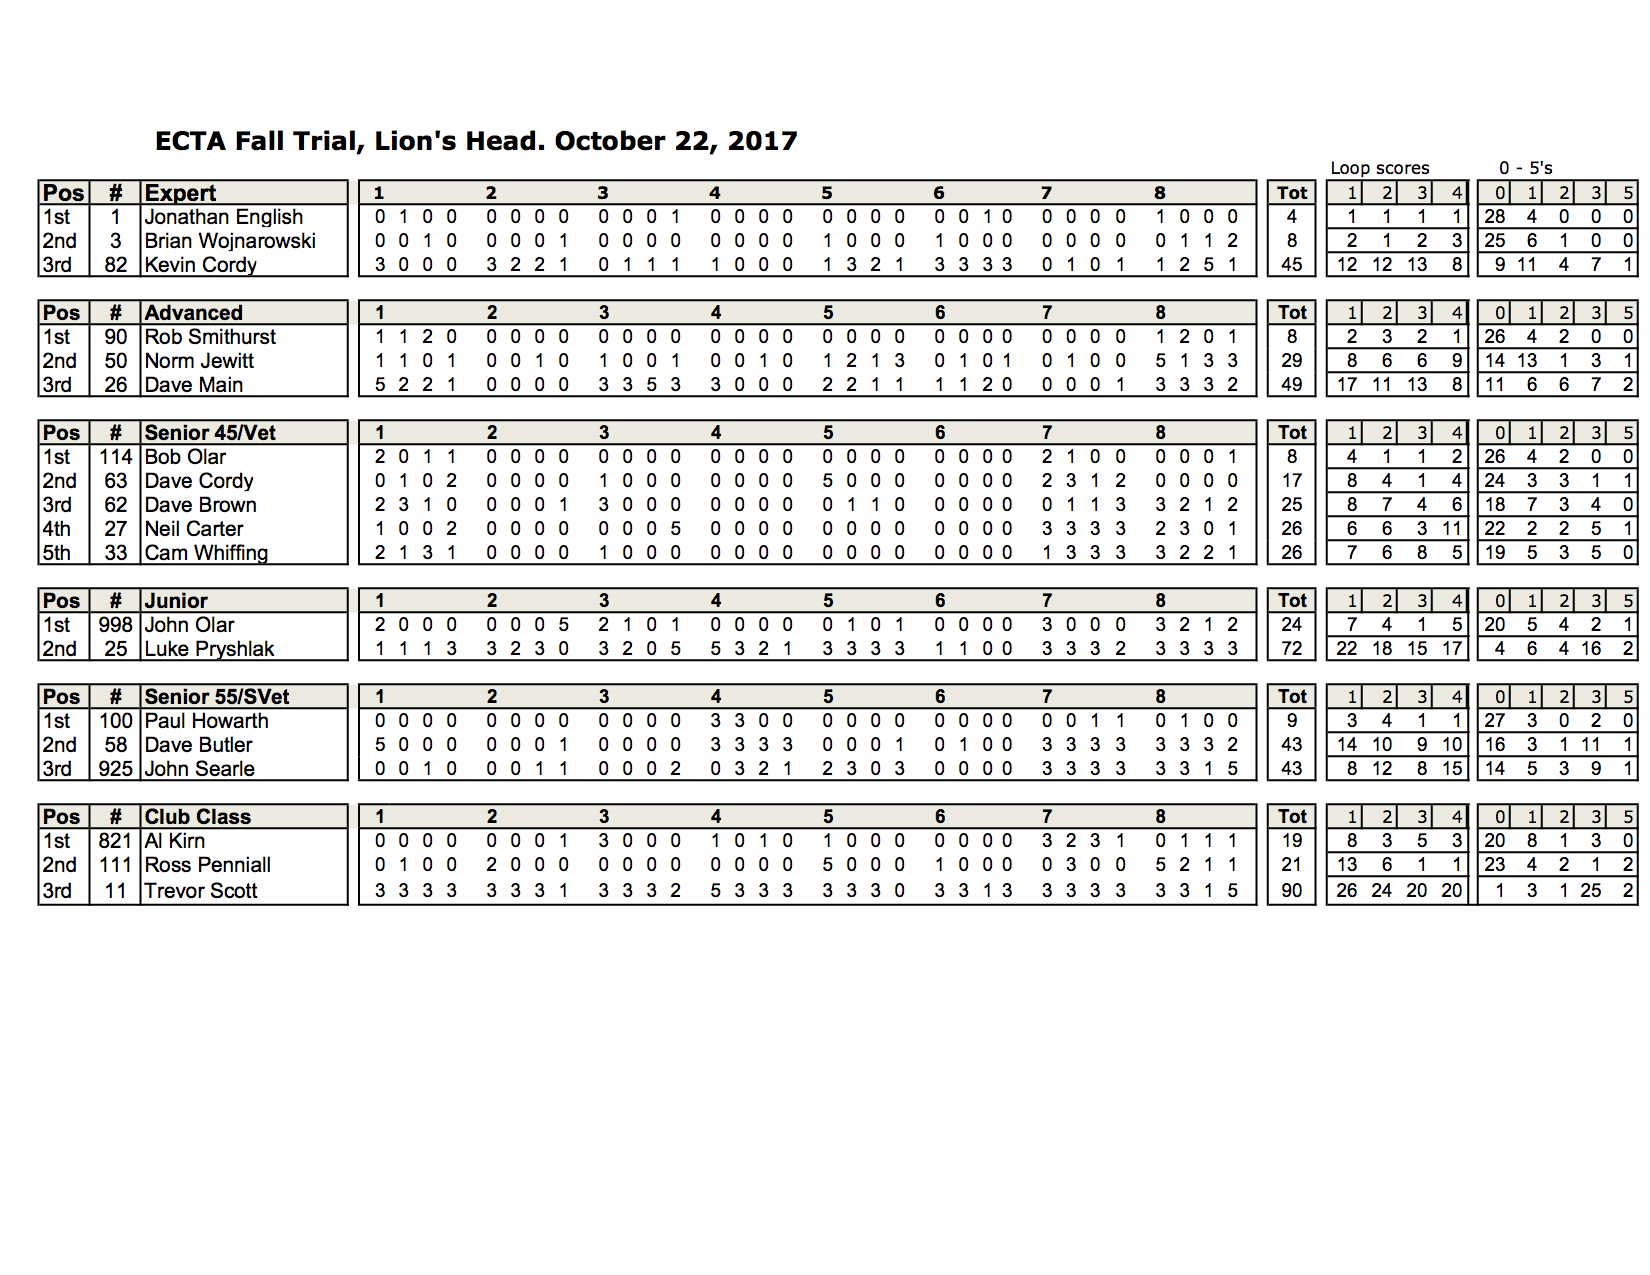 ECTA Lion's Head Fall Trial Results 10-22-2017